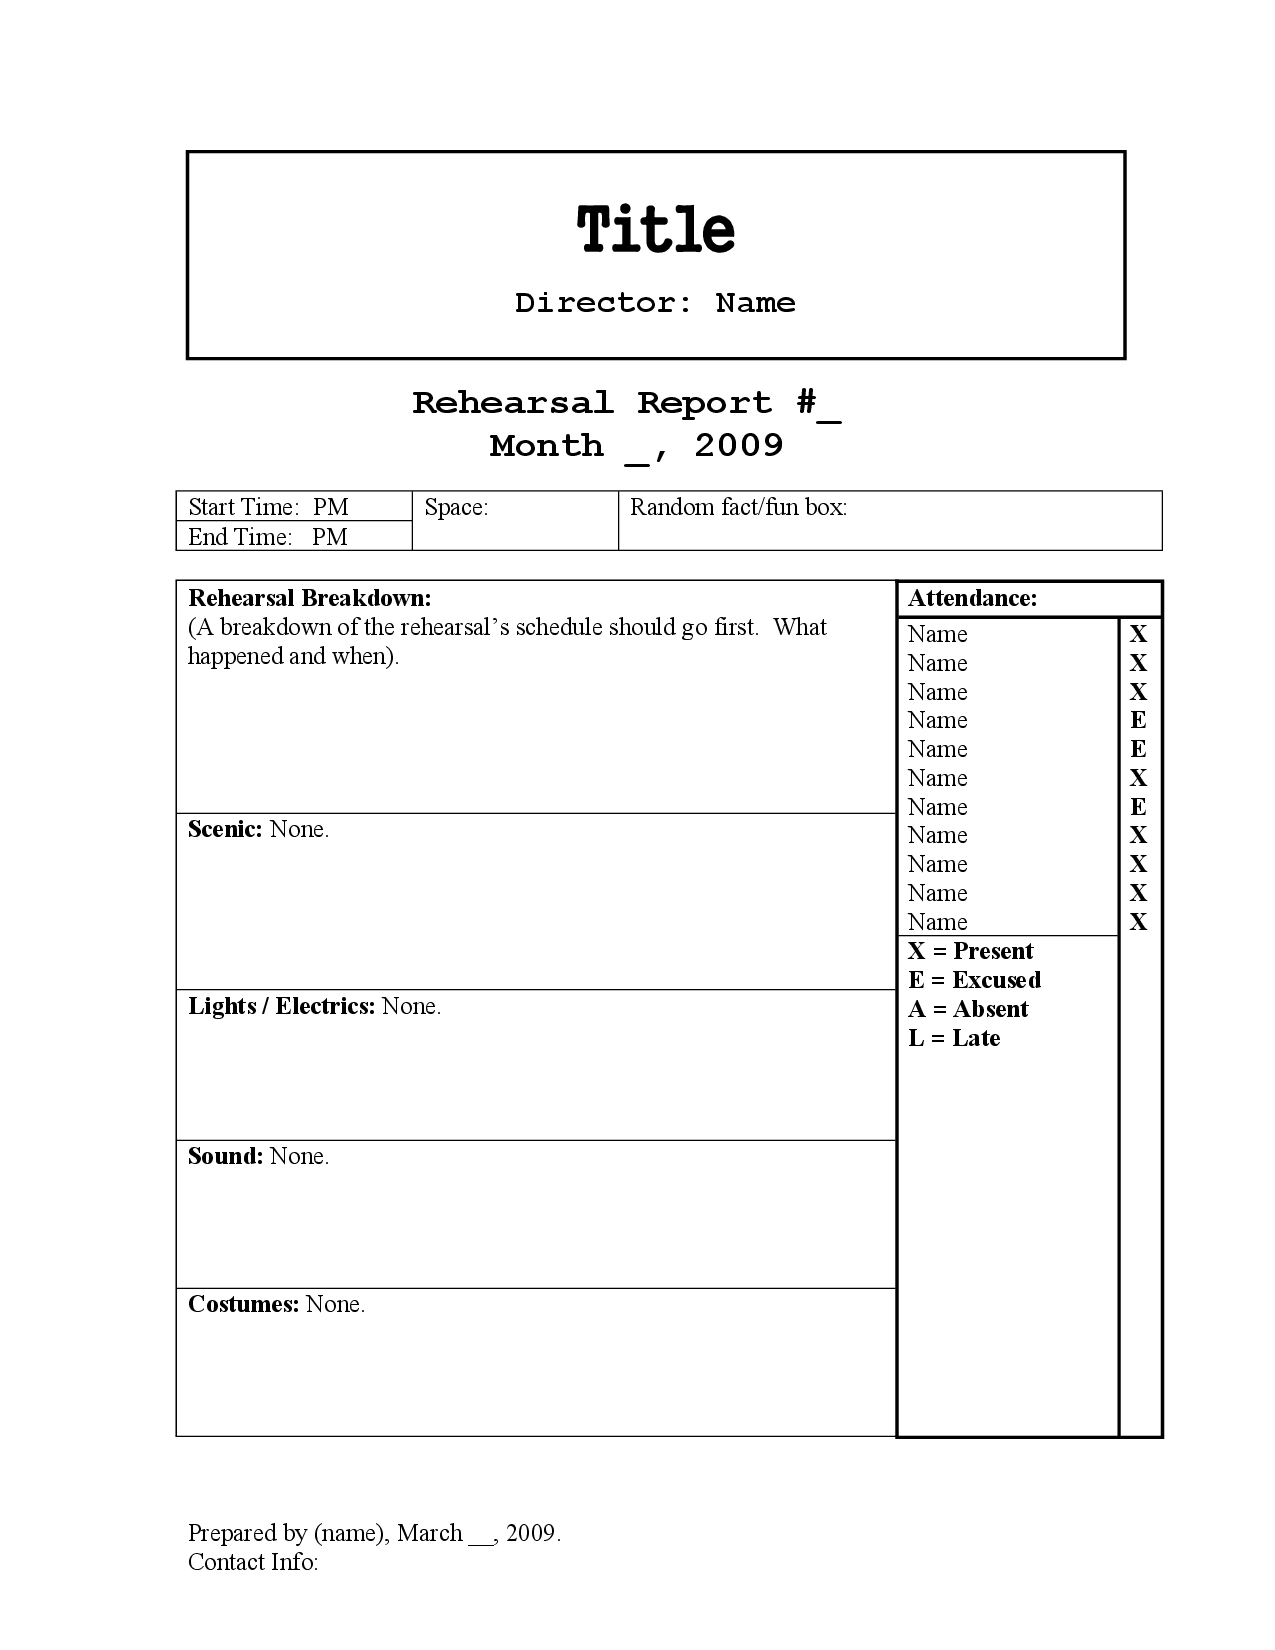 Rehearsal Report Template | Stage Manager In 2019 | Project In Sound Report Template